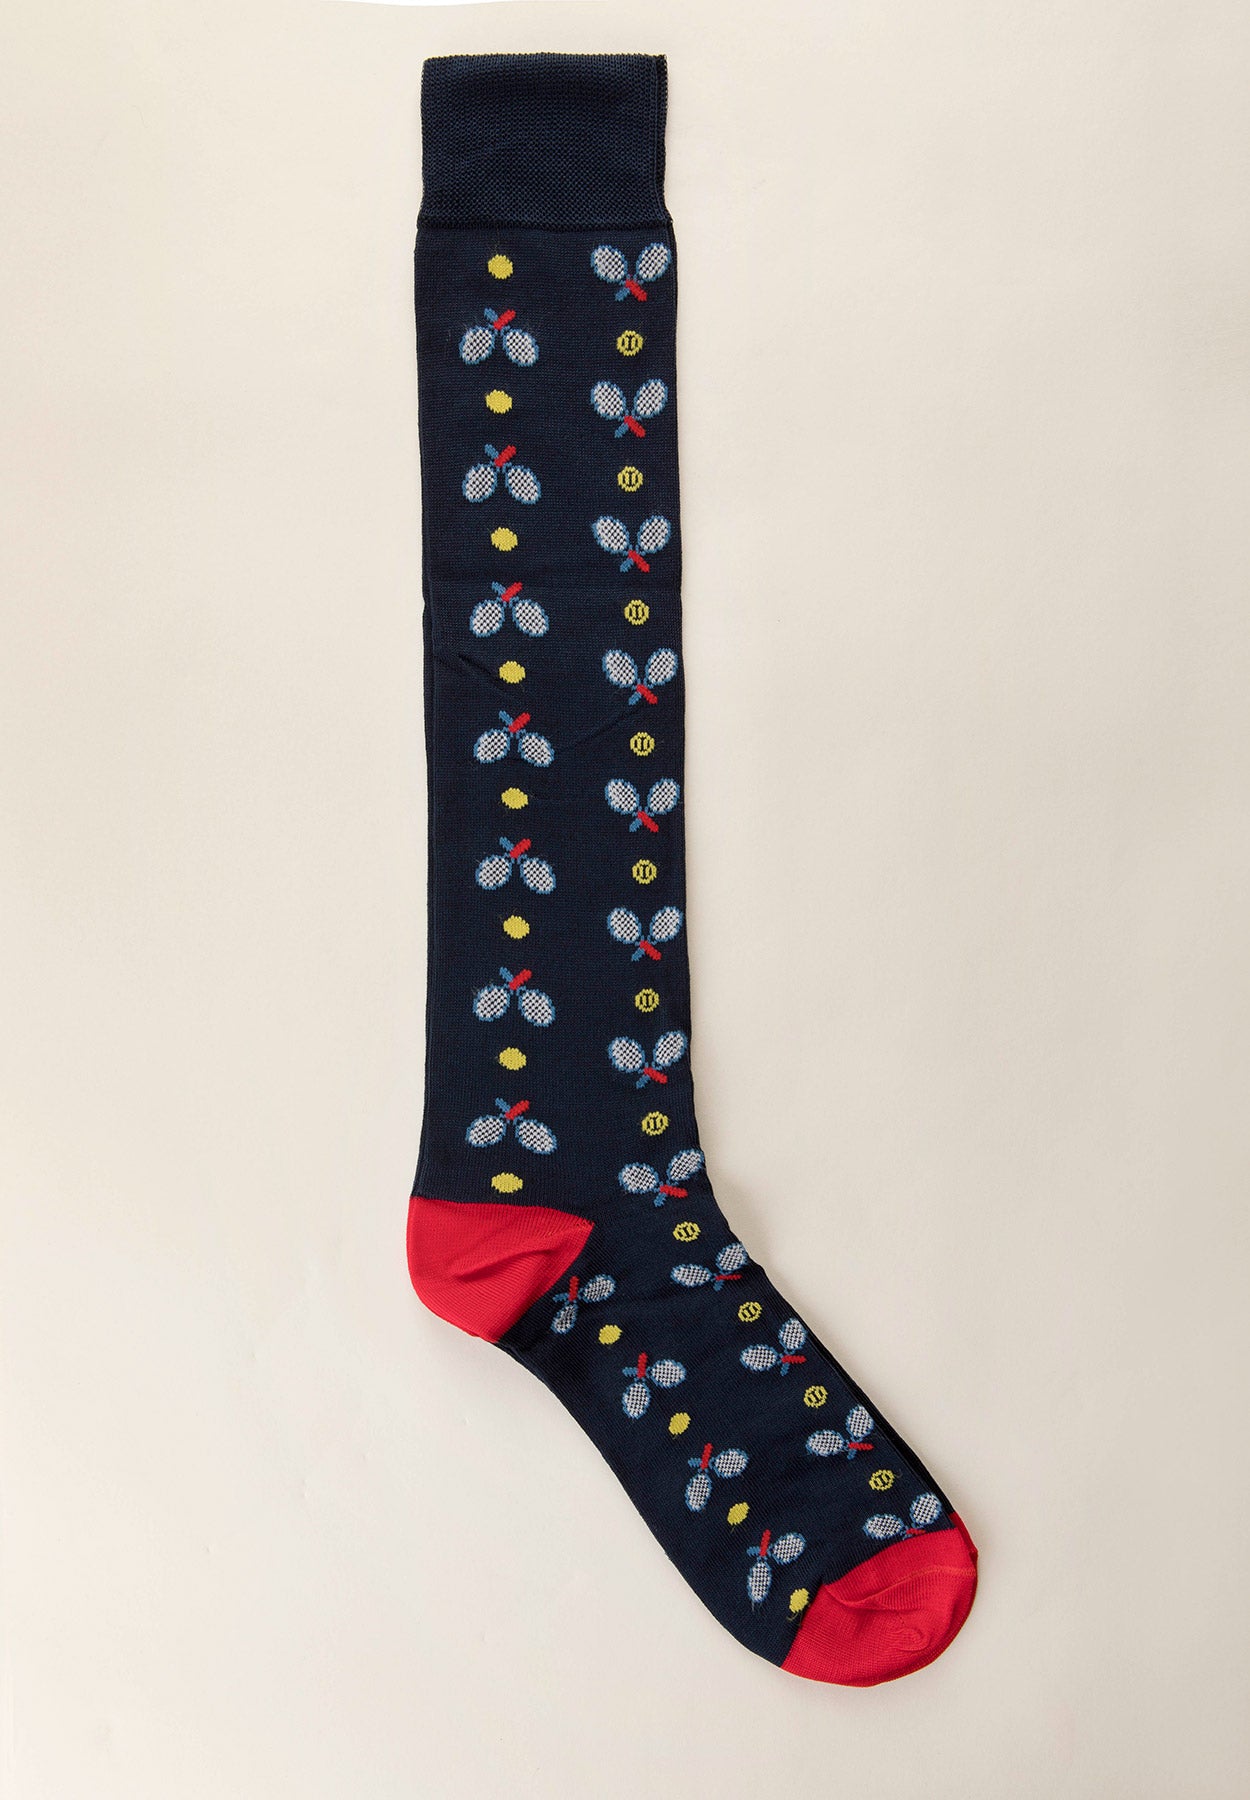 Blue cotton stretch socks with tennis pattern